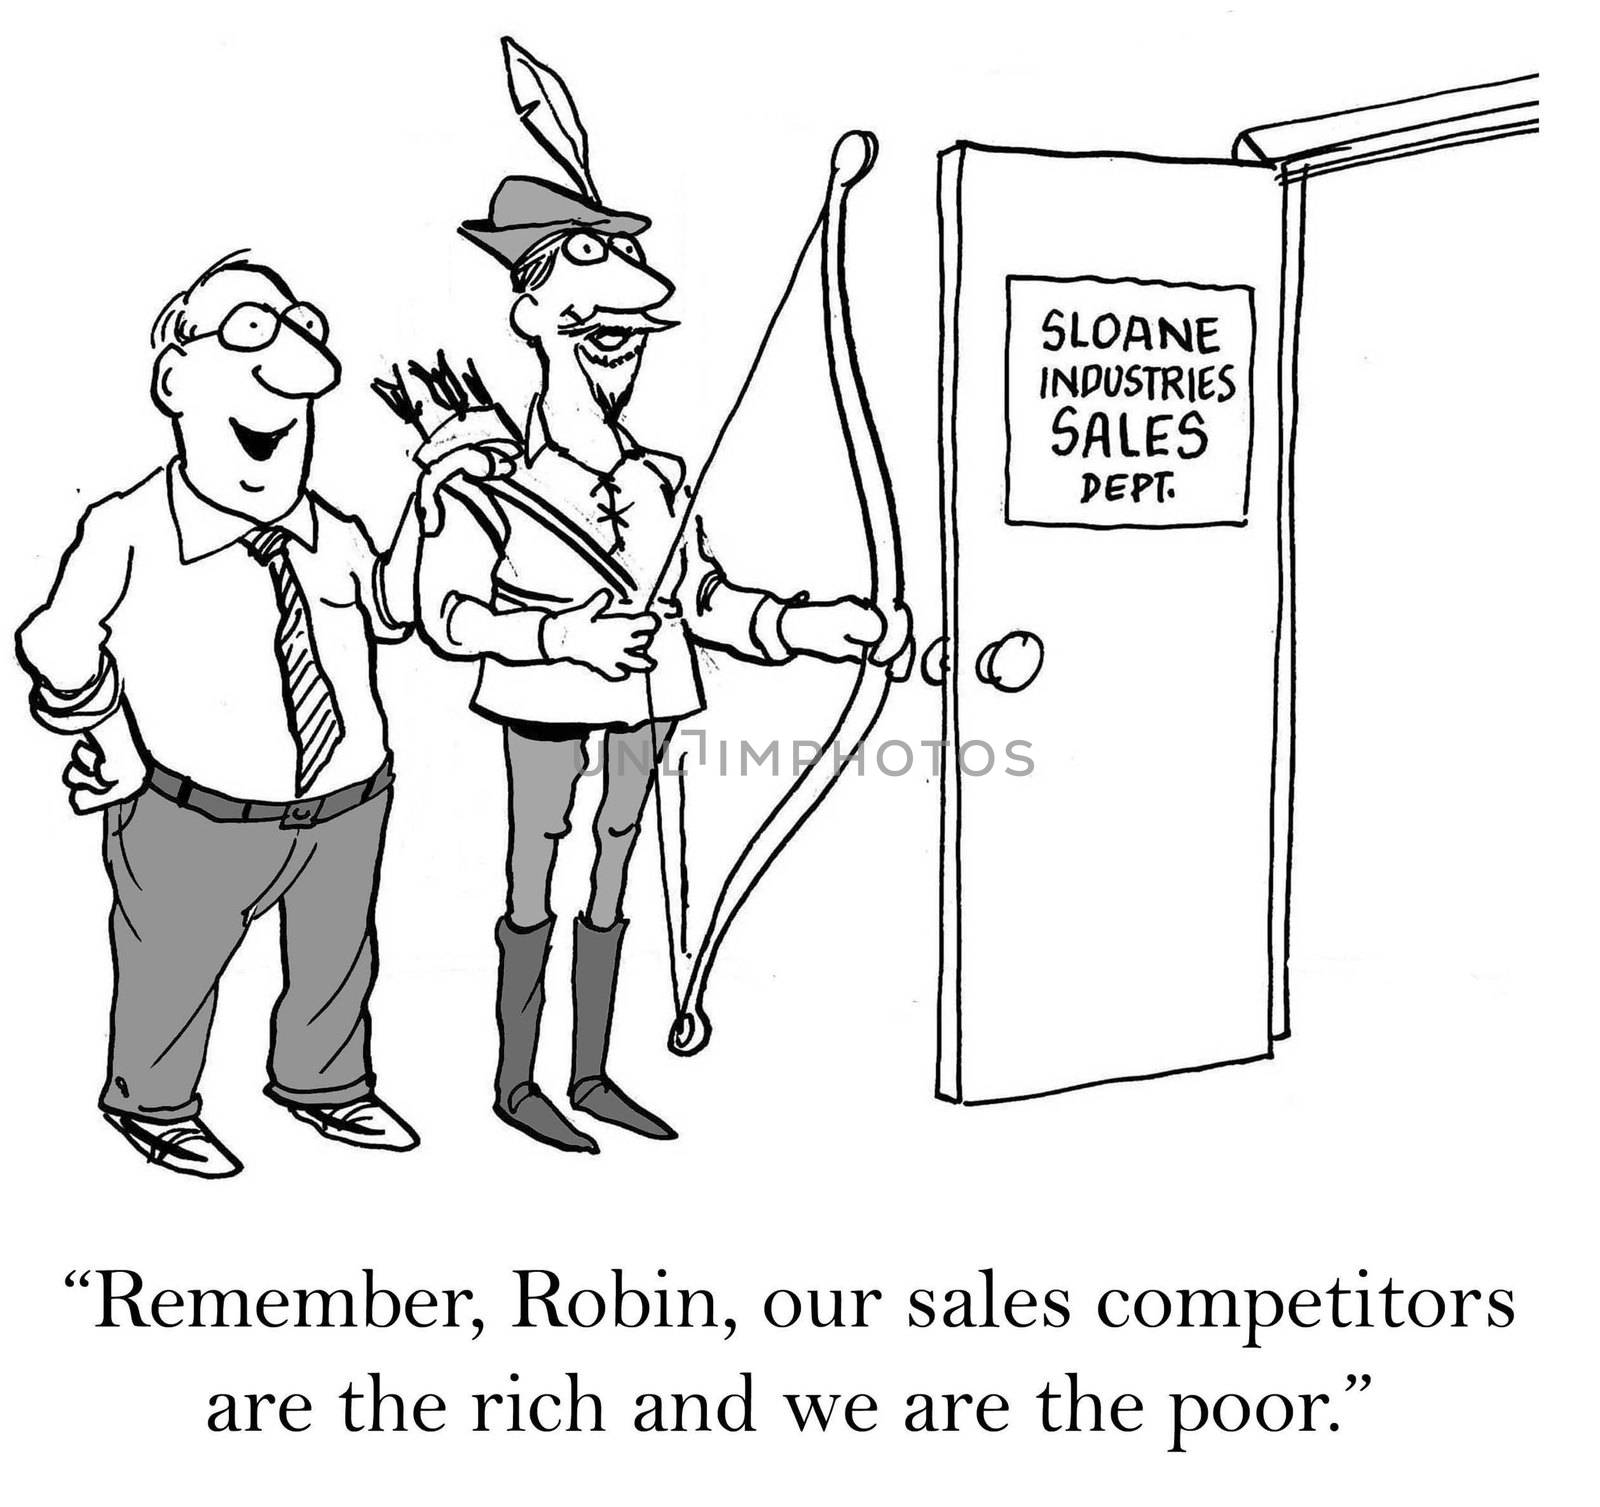 Rich and poor with sales competition by andrewgenn